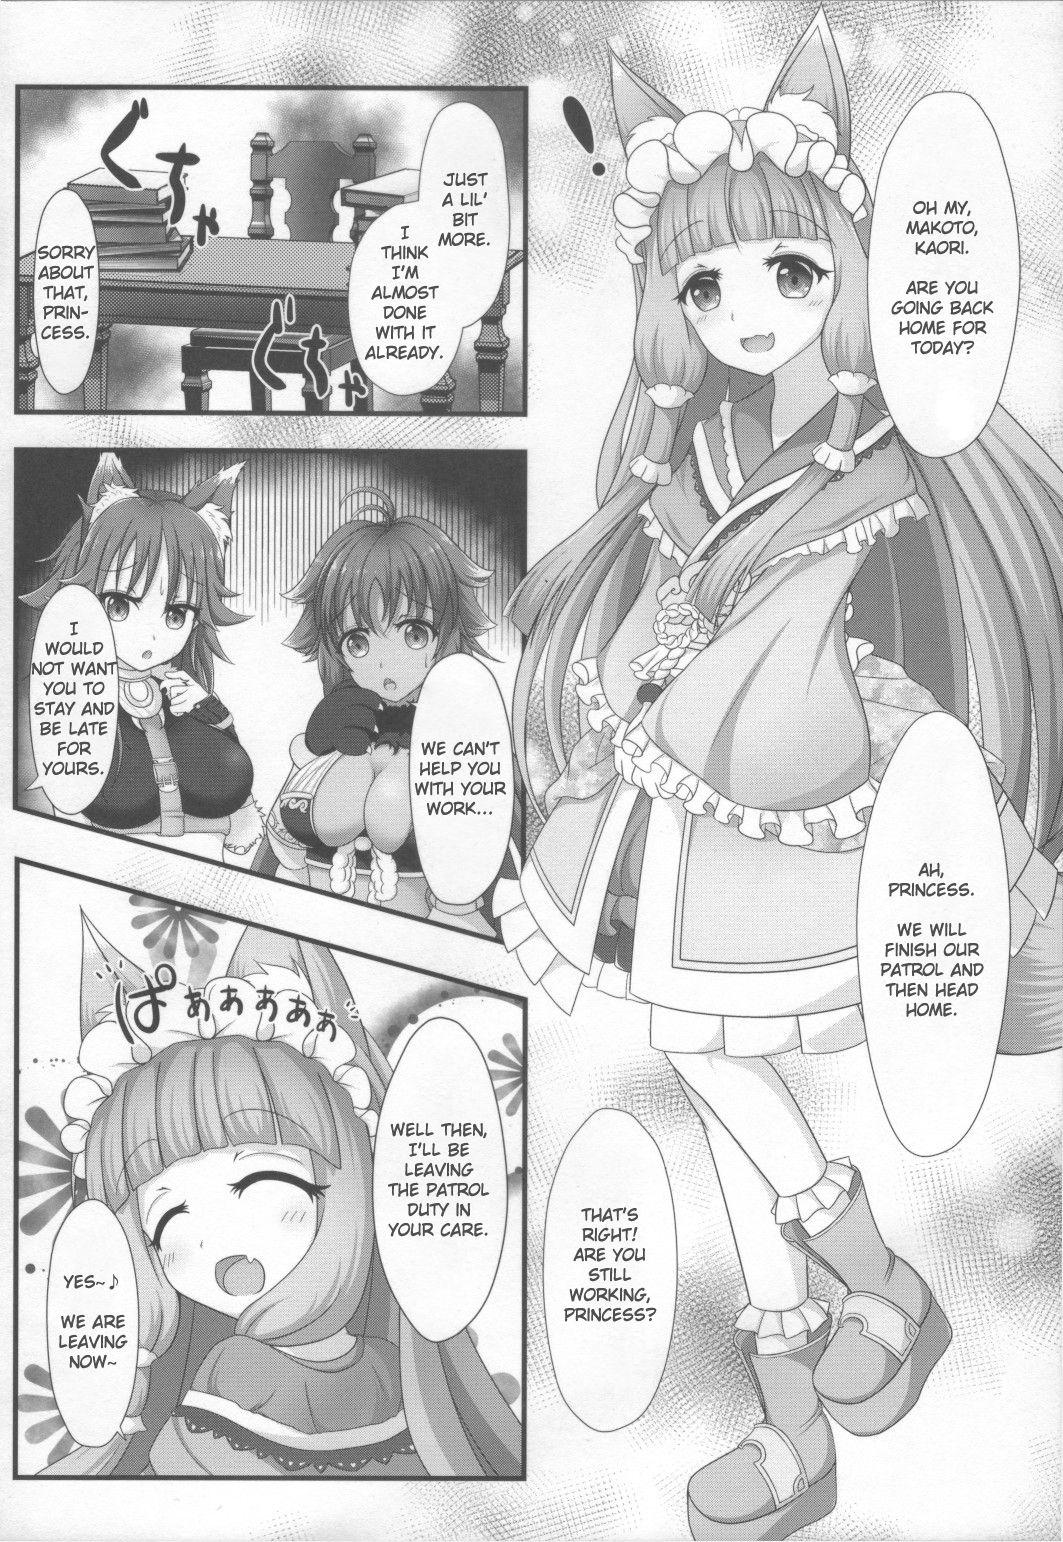 Fitness Maho Hime Connect! - Princess connect Sluts - Page 3